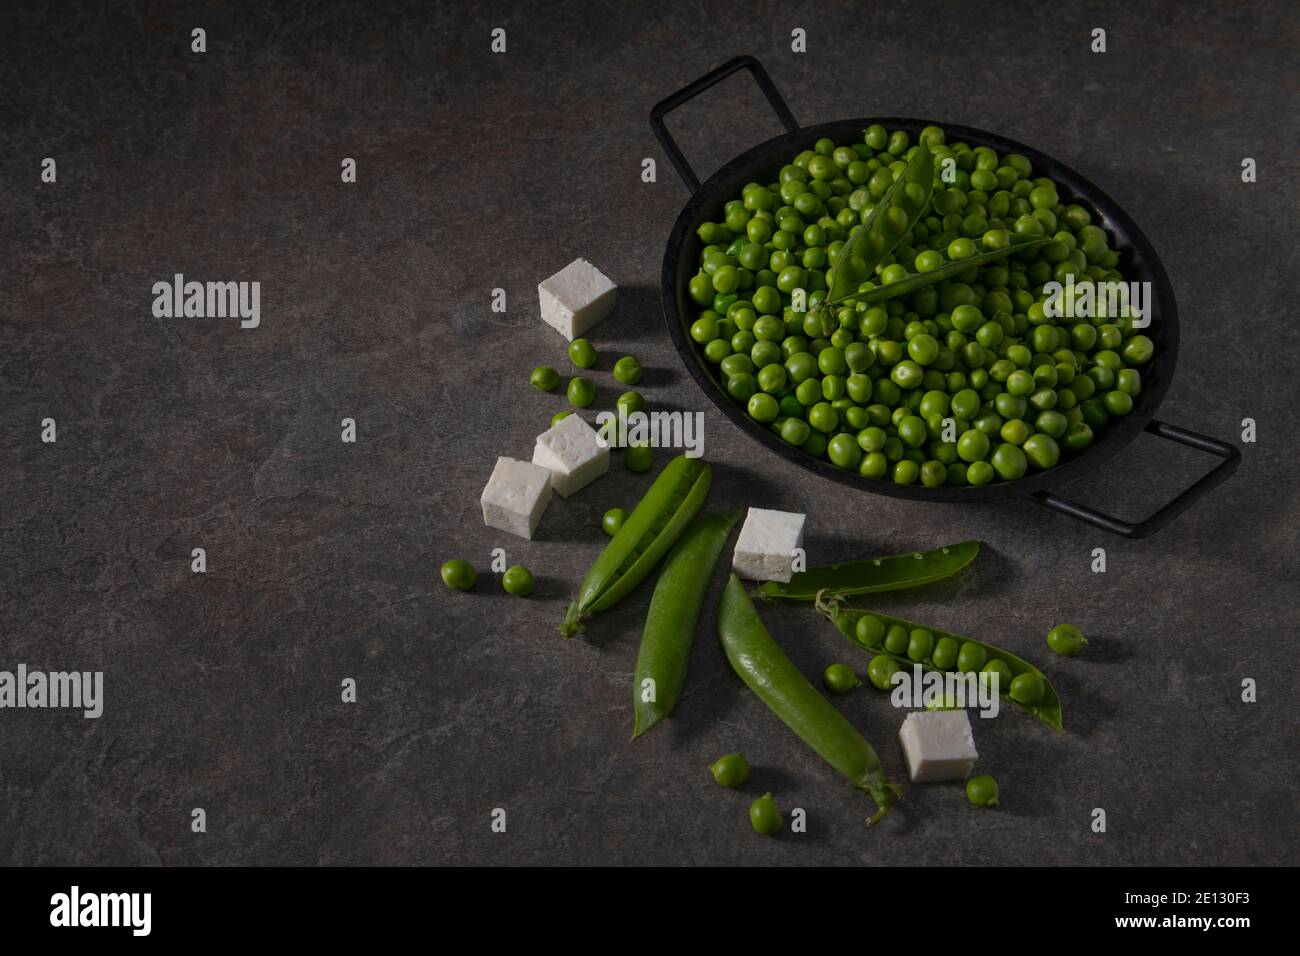 A bowl of fresh peas with some cottage cheese or paneer pieces Stock Photo